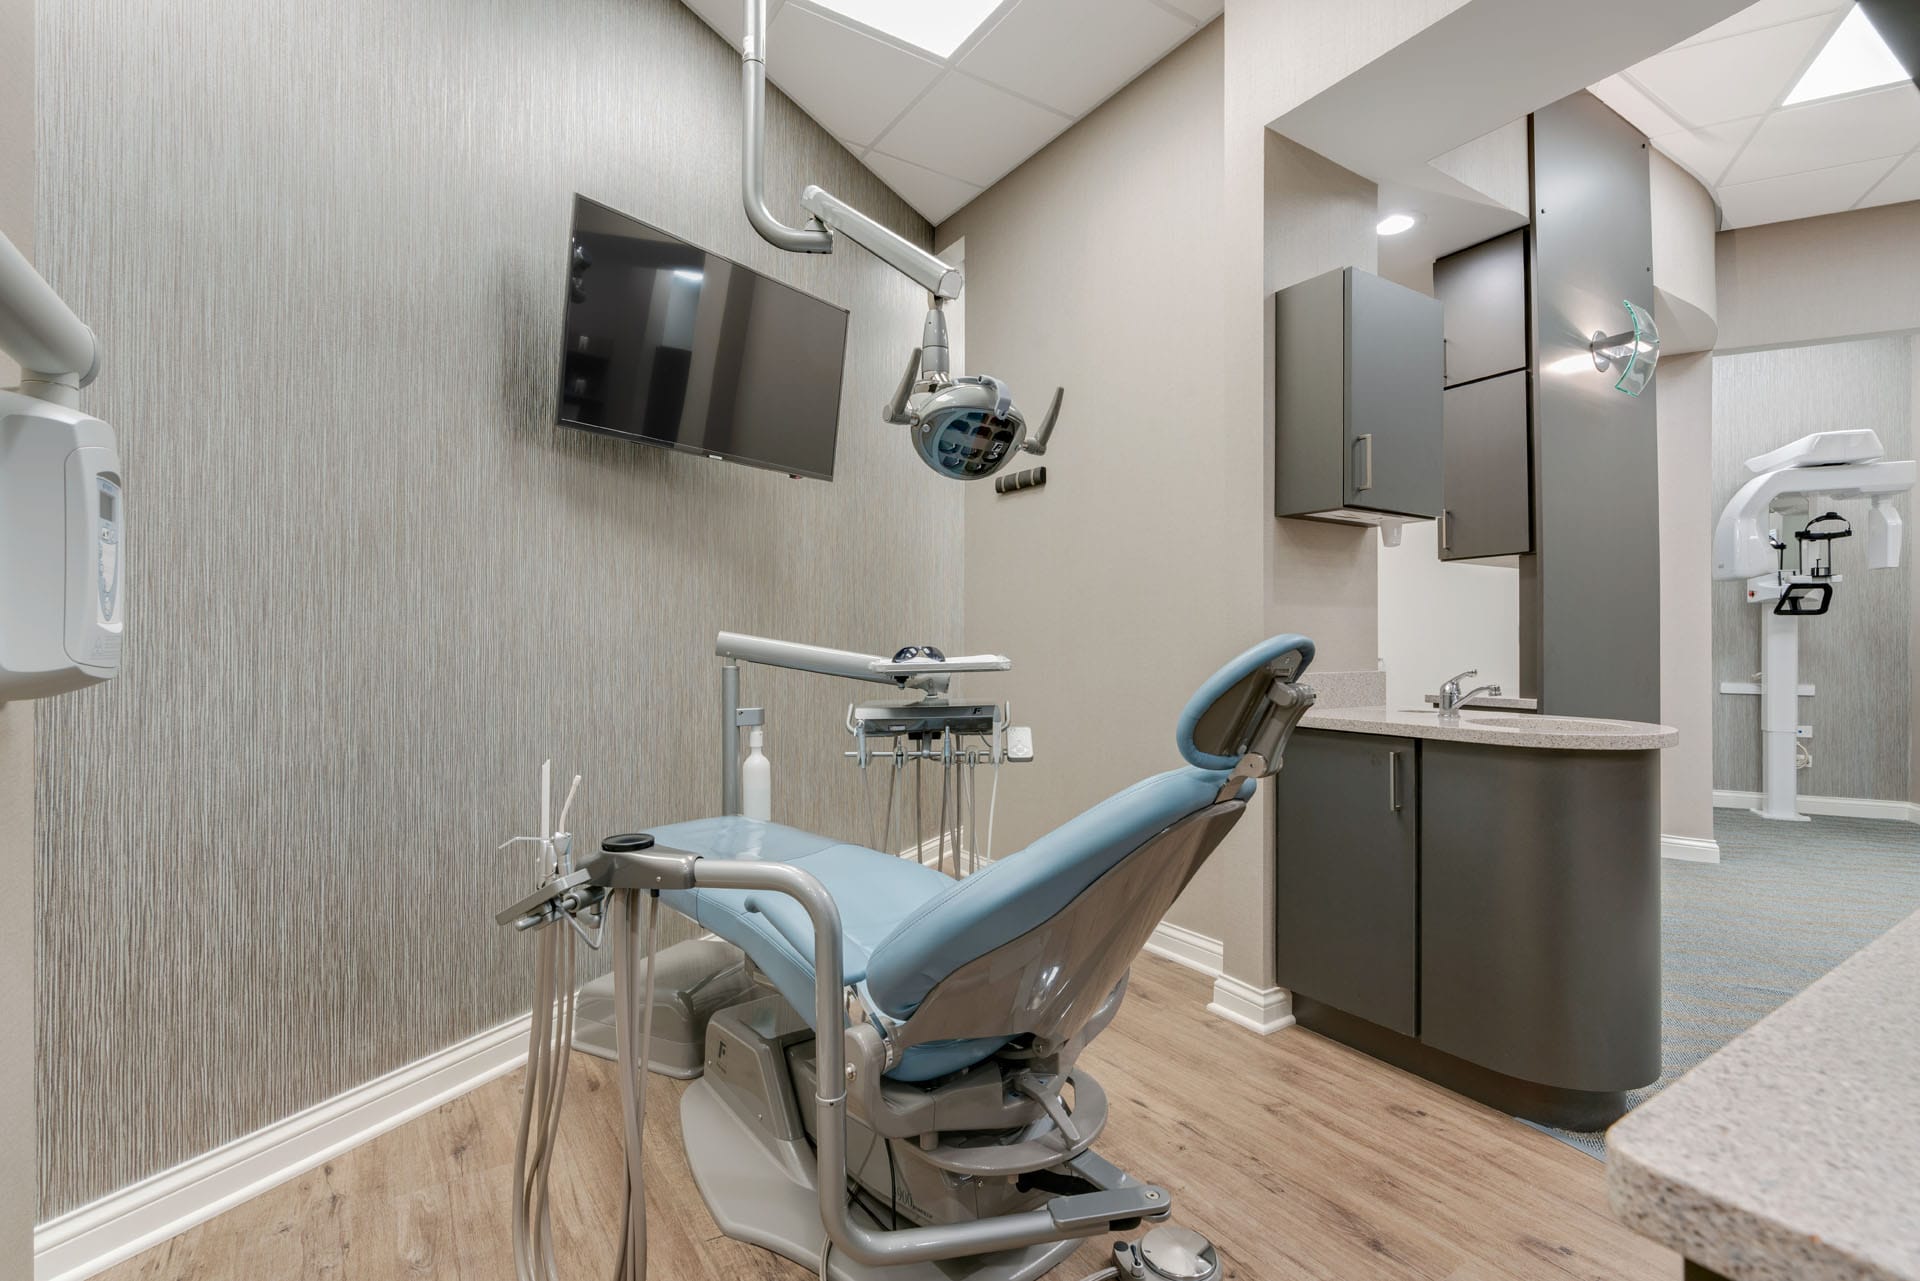 General Dentistry in Willowbrook, IL